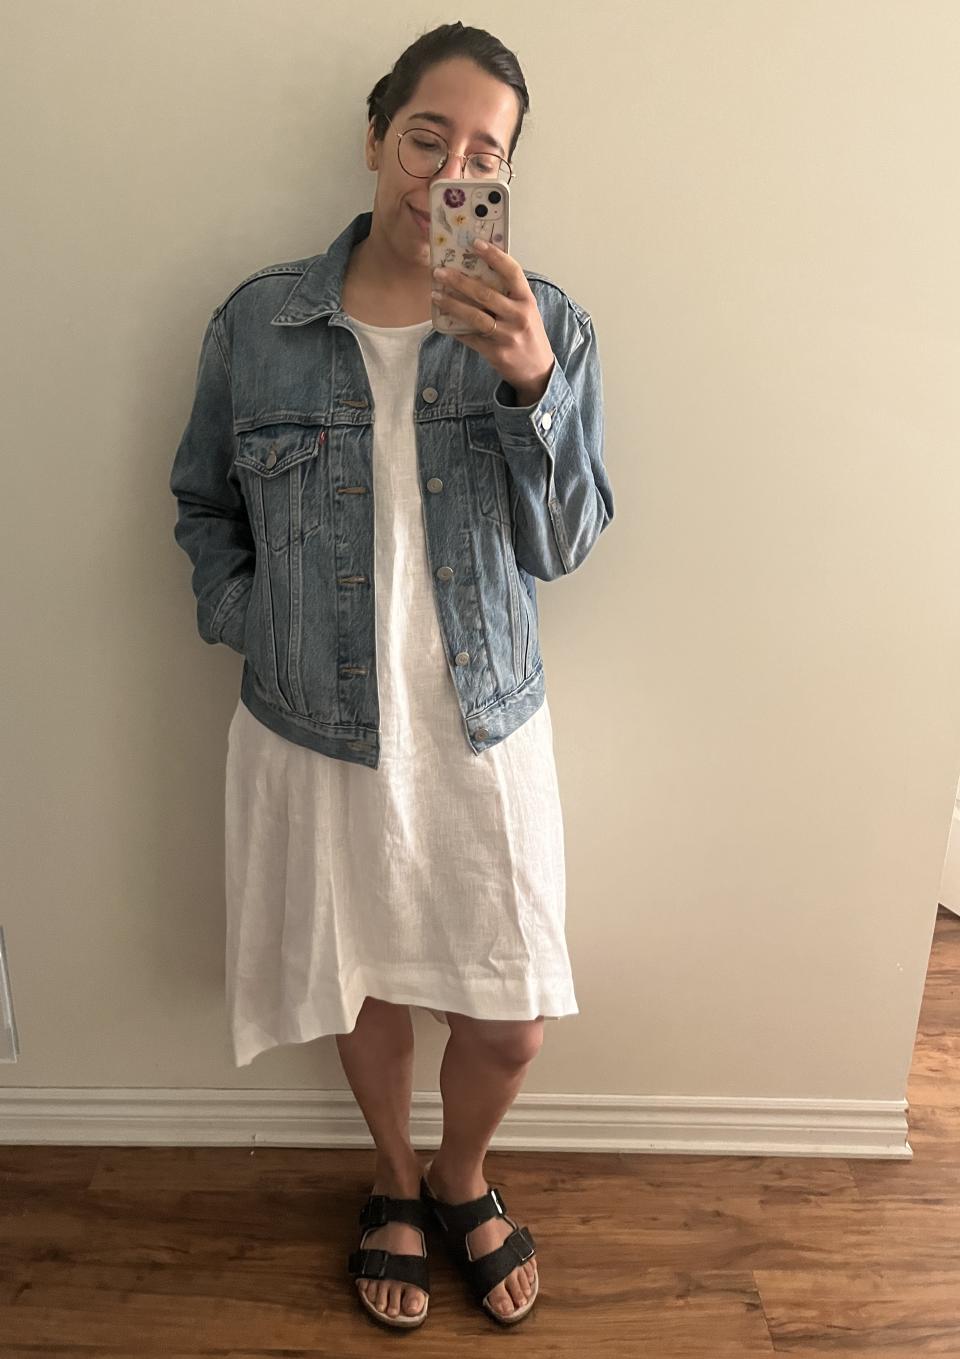 This time I went for a more casual look by pairing the Magic Linen dress with a denim jacket.